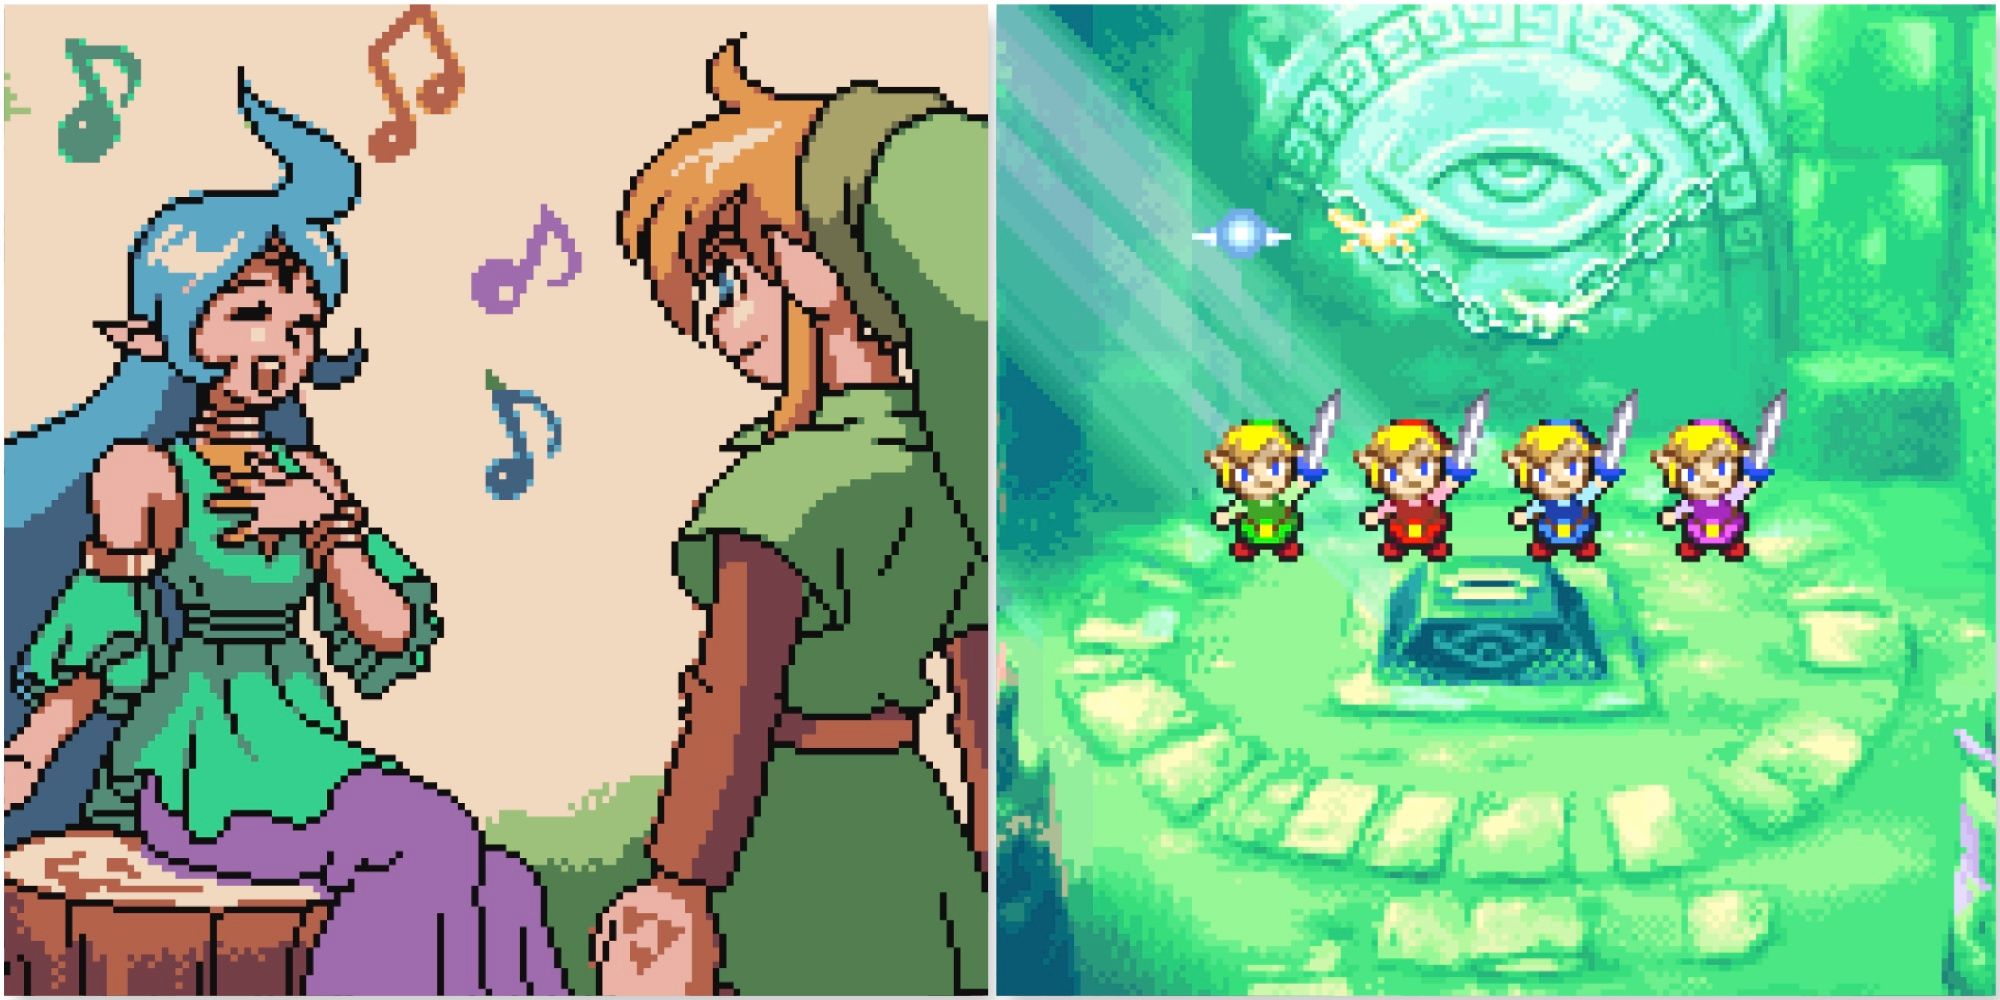 Zelda 7 in 1 GBA Collection Minish Cap Oracles Ages 